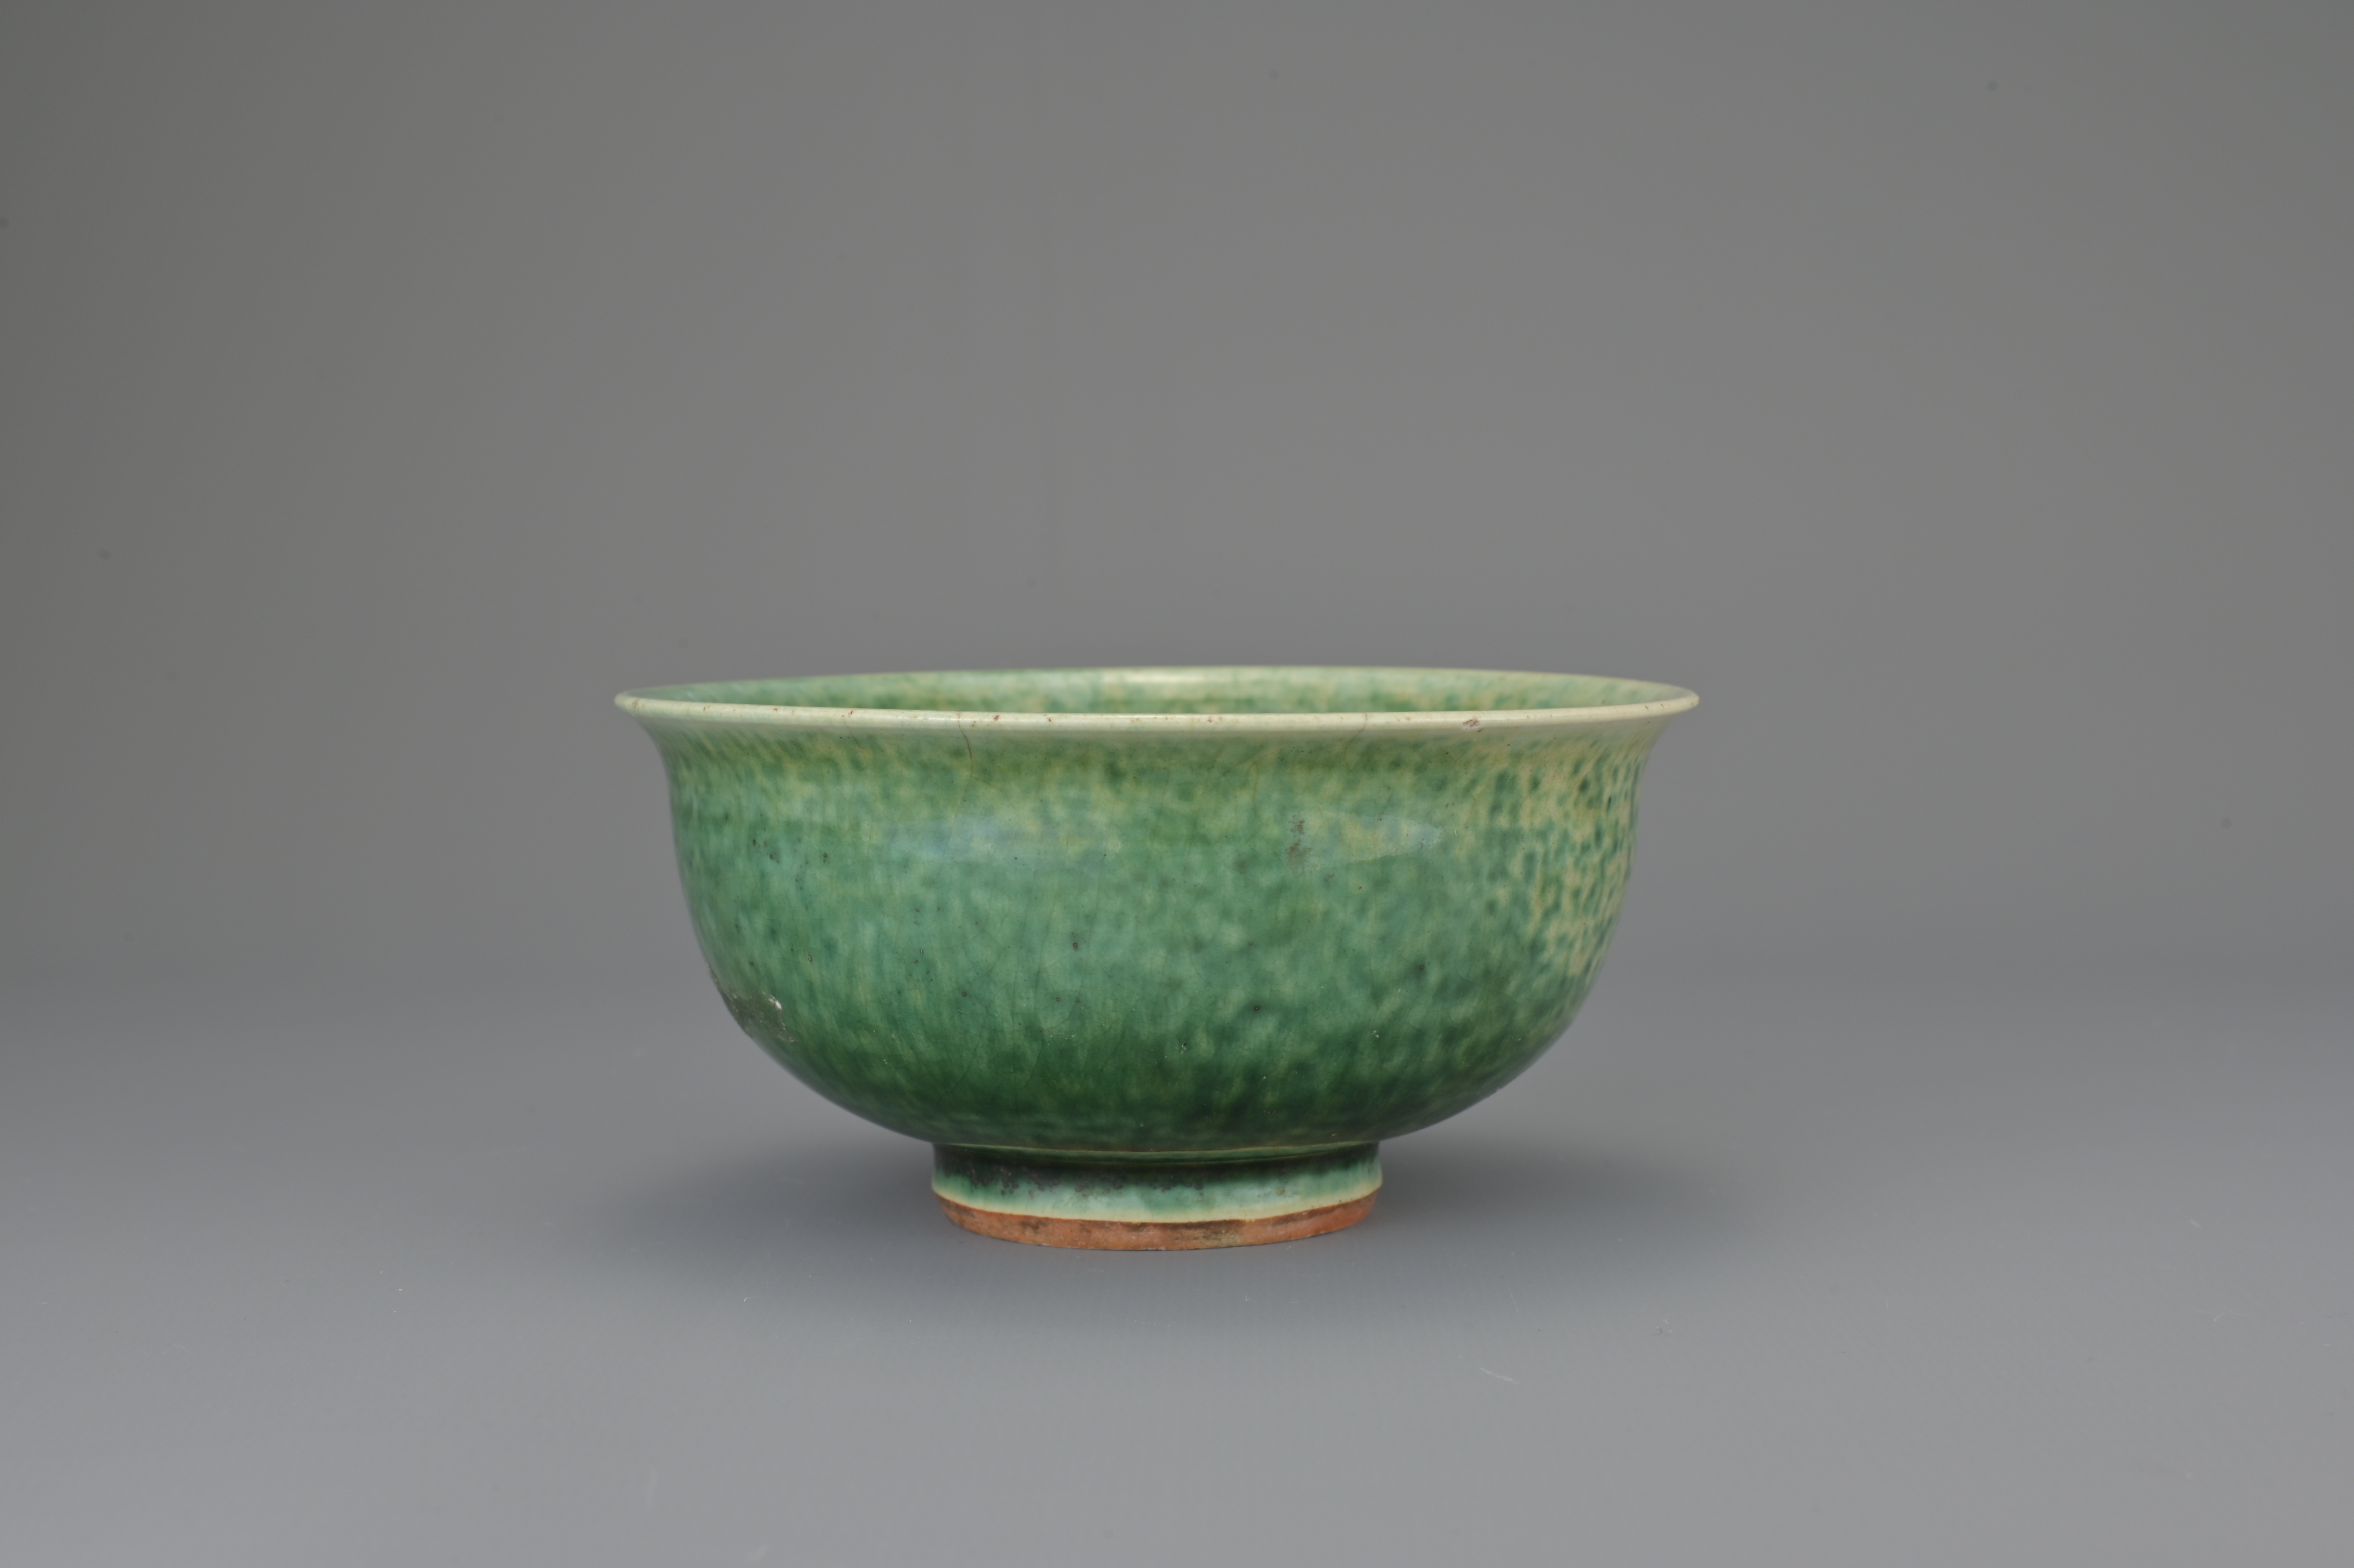 CHINESE COPPER-GREEN GLAZED PORCELAIN BOWL, QING DYNASTY, 18/19th CENTURY - Image 3 of 8